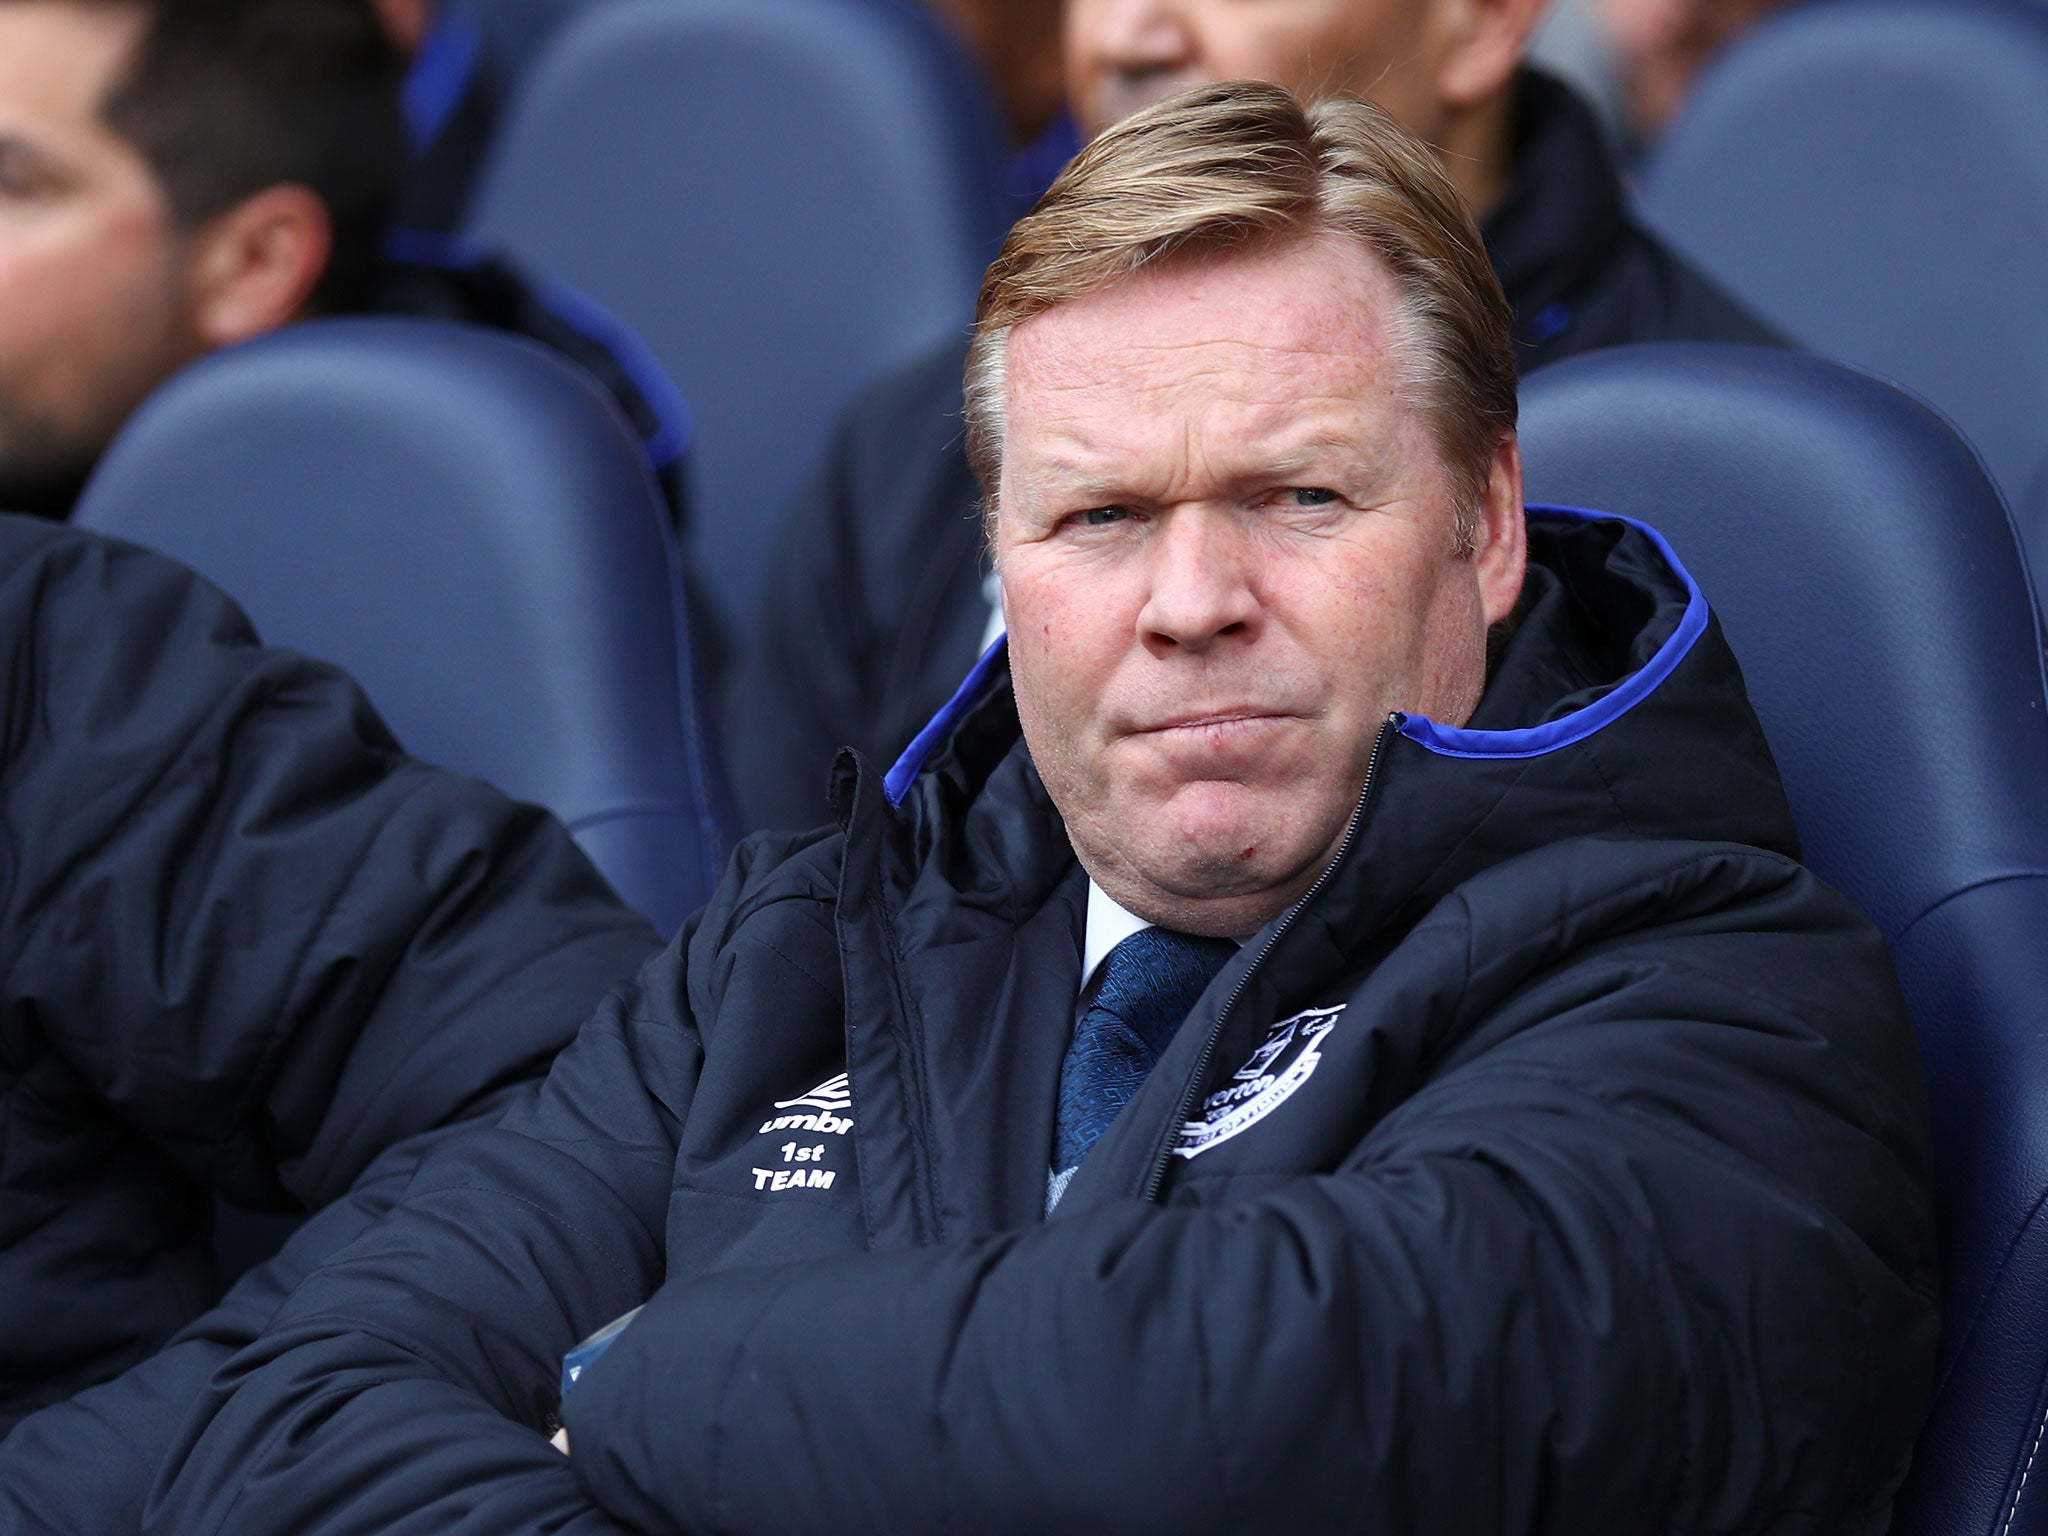 Ronald Koeman was speaking ahead of his side's trip to Old Trafford on Tuesday night